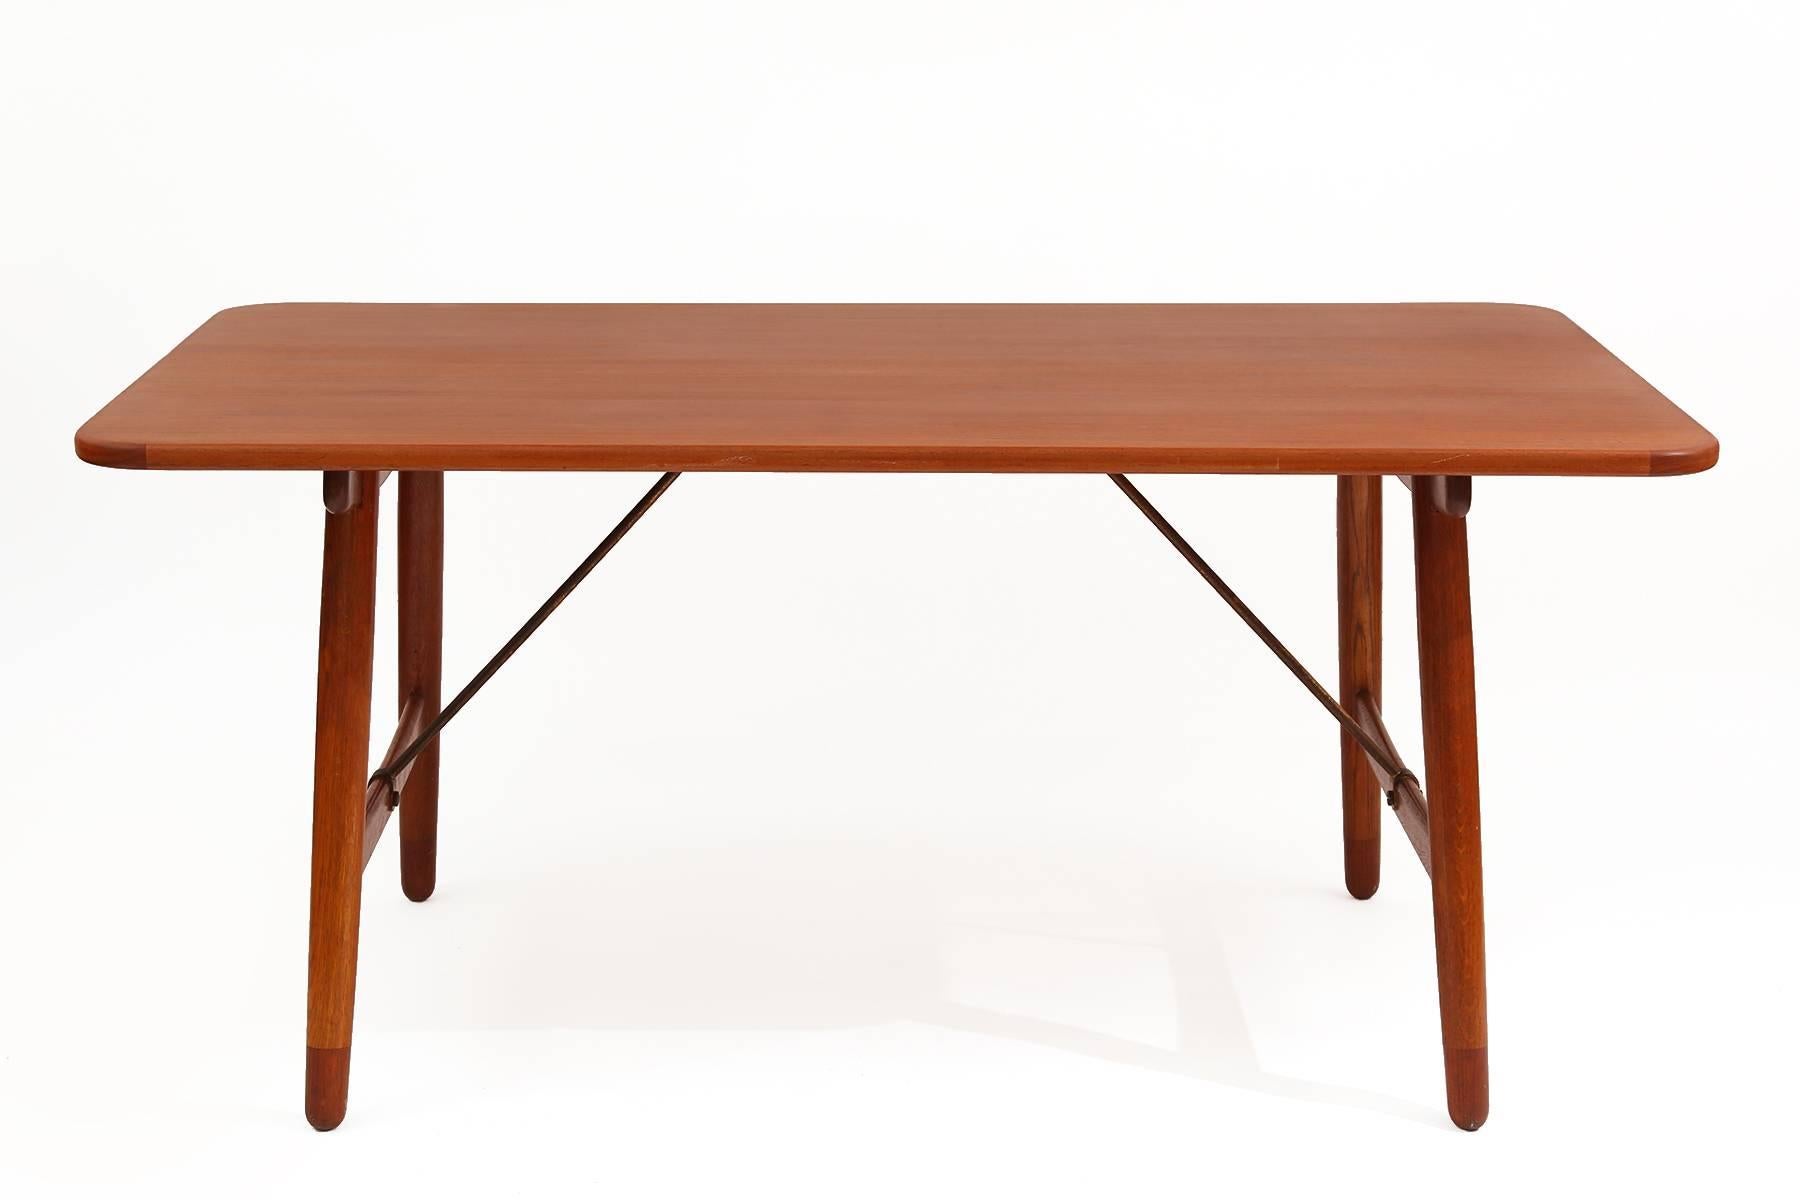 Borge Mogensen hunting dining table, circa late 1950s. This seldom seen example has a beautifully grained solid teak top, patinated brass stretchers and solid teak legs.